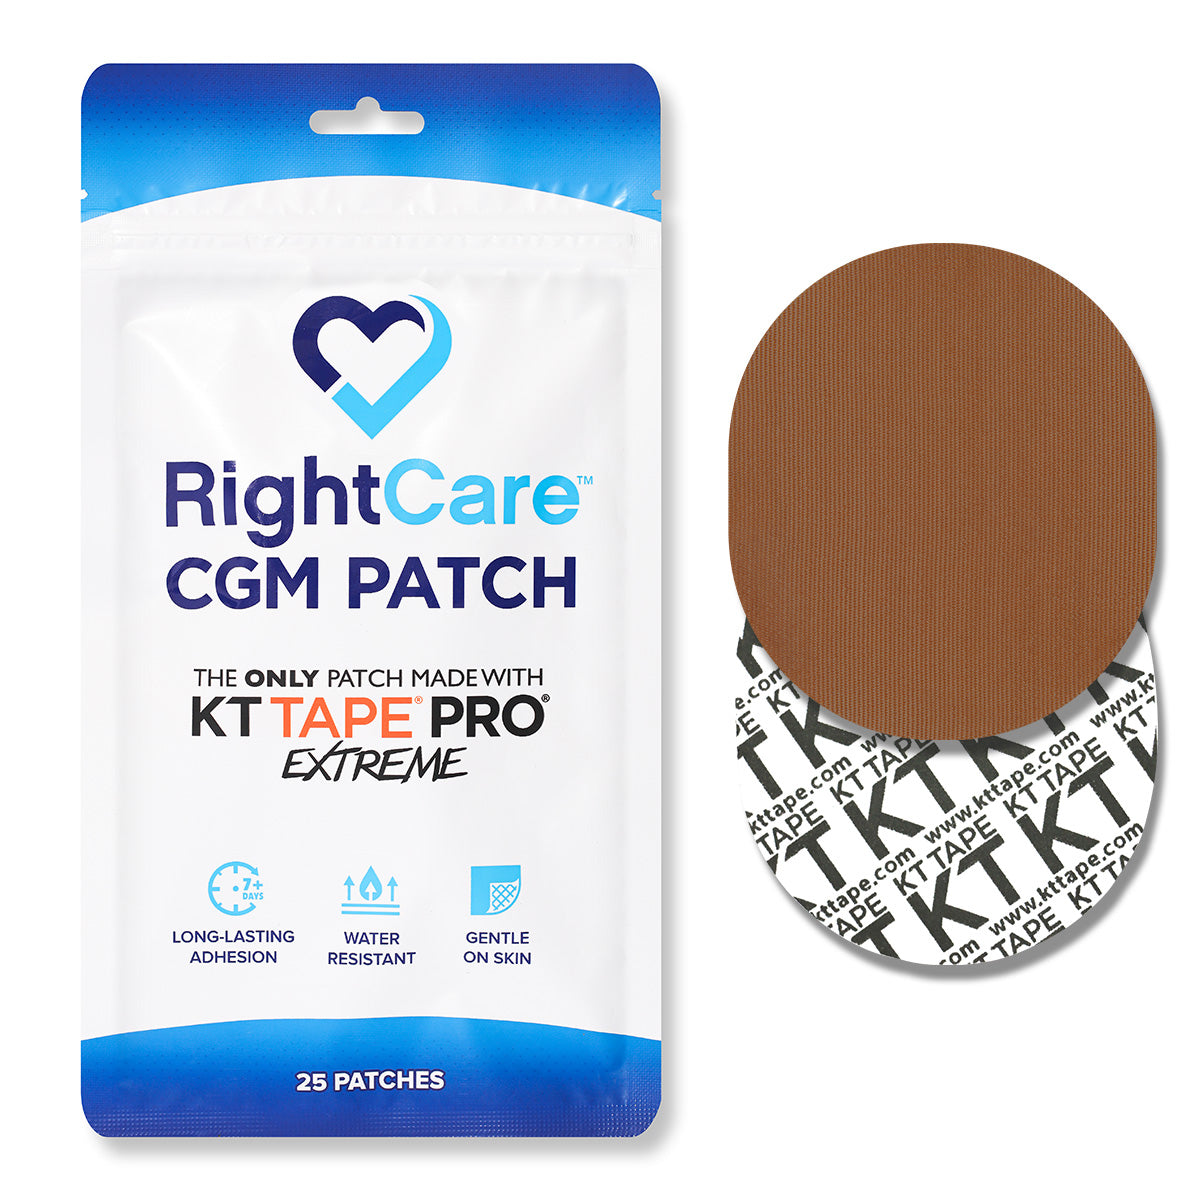 RightCare CGM Adhesive Patch made with KT Tape, Universal, Bag of 25 75173382